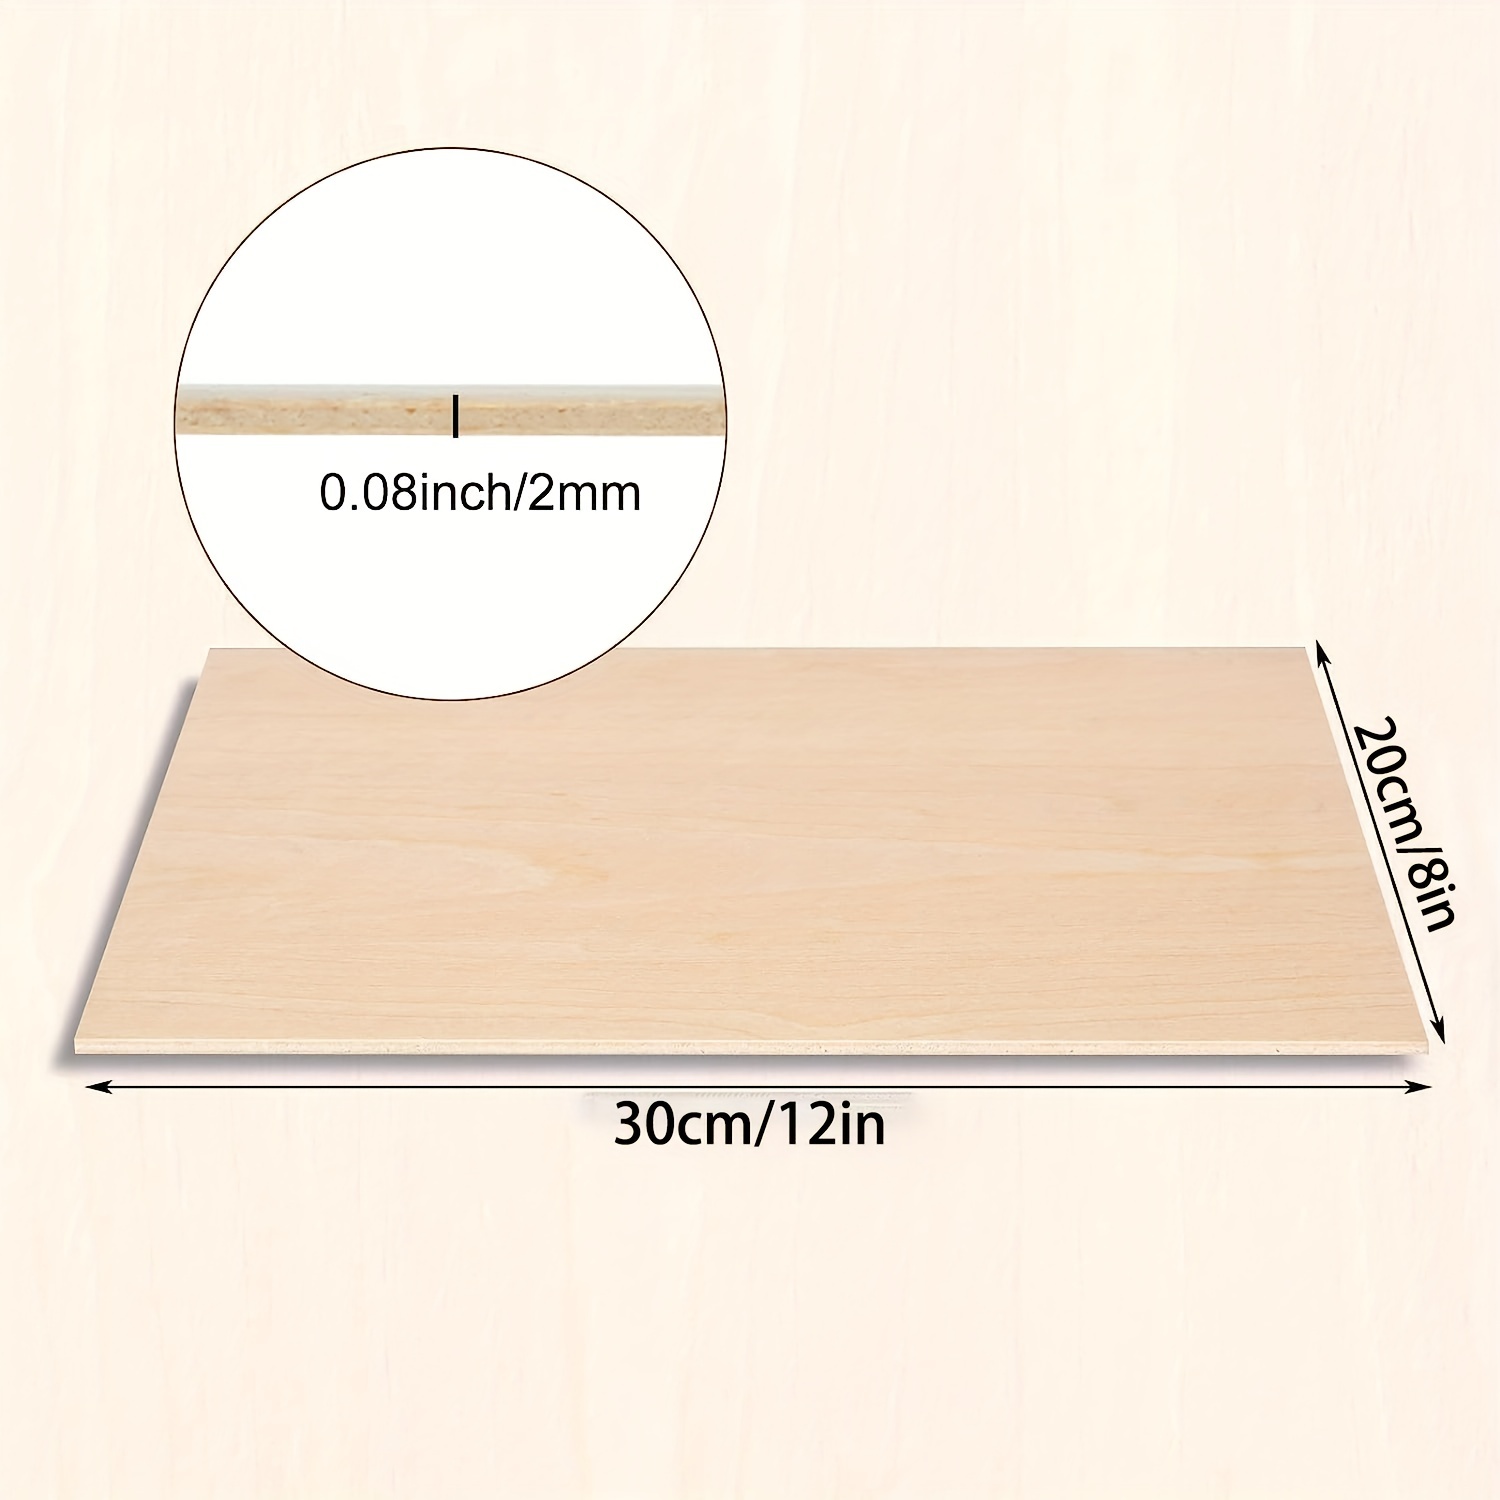  Basswood Craft Board Model Wood Thickness 2MM DIY